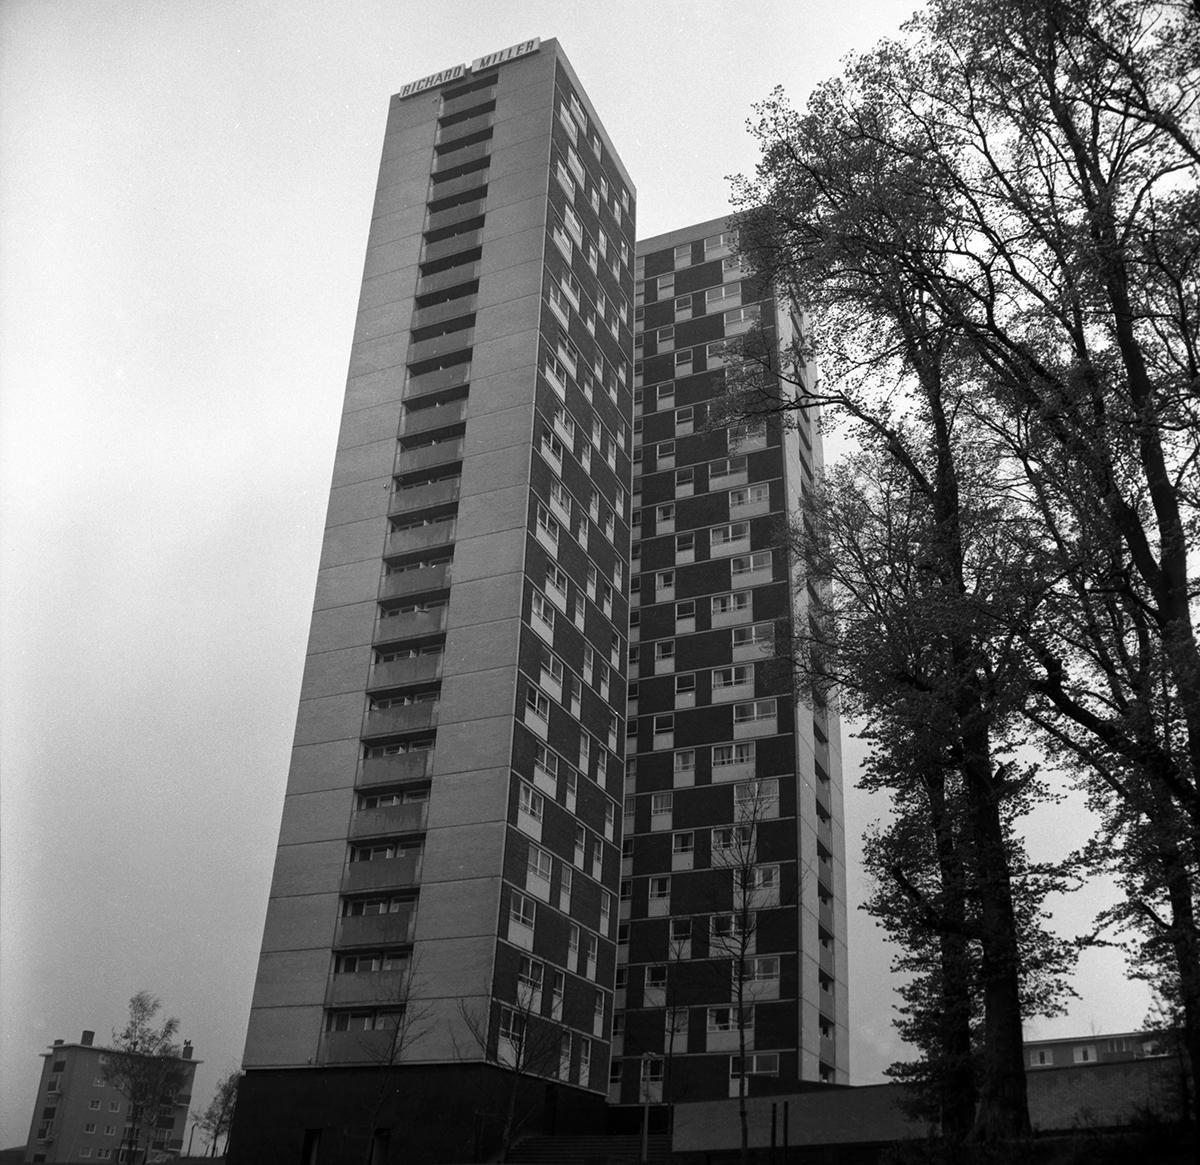 Millbrook Towers through the years